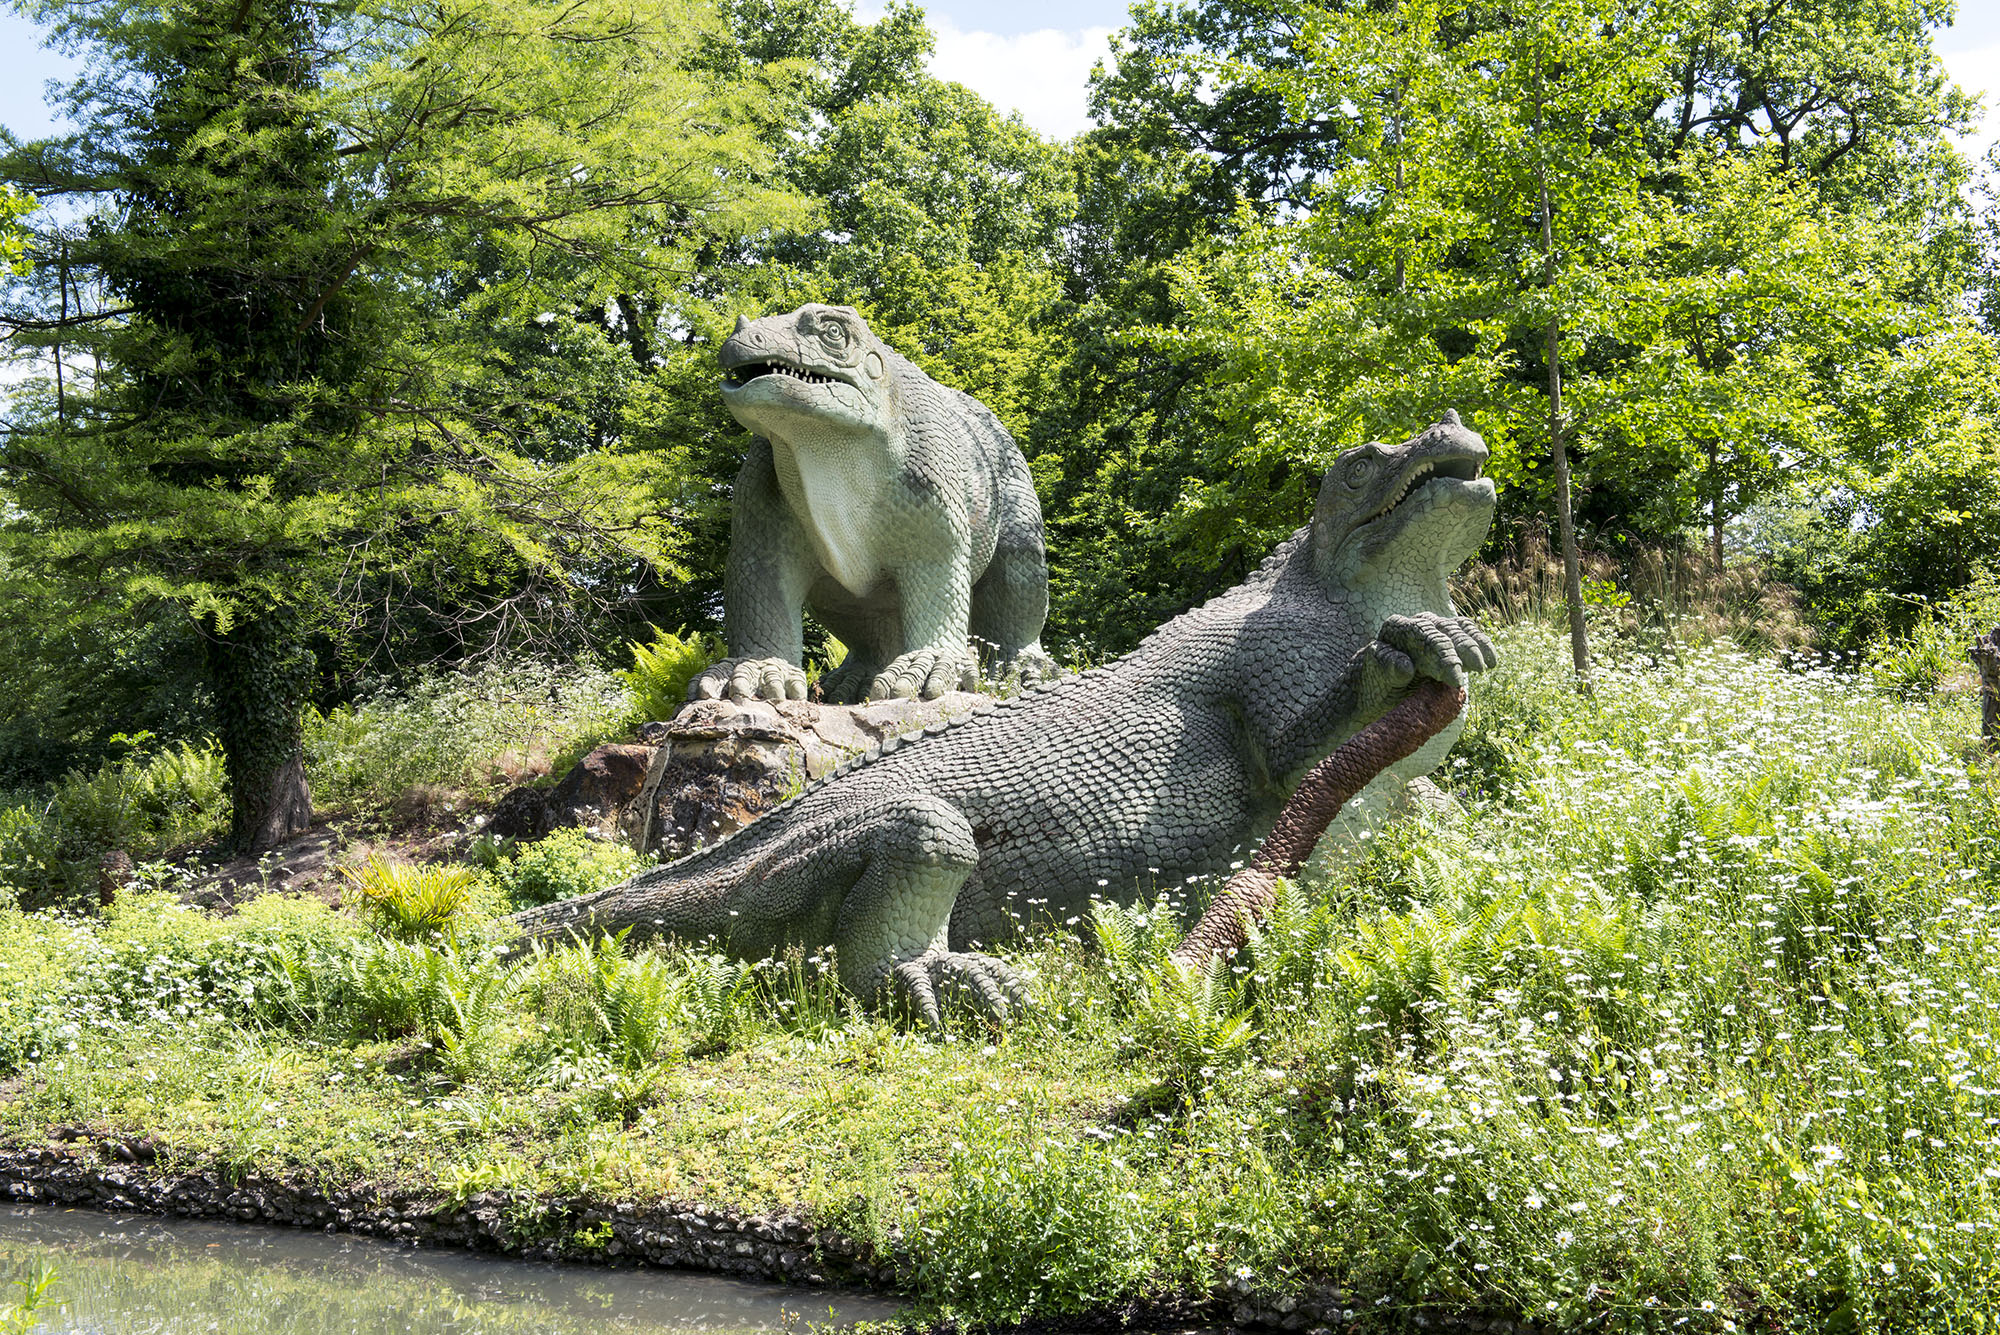 Two Iguanodon on a grassy bank